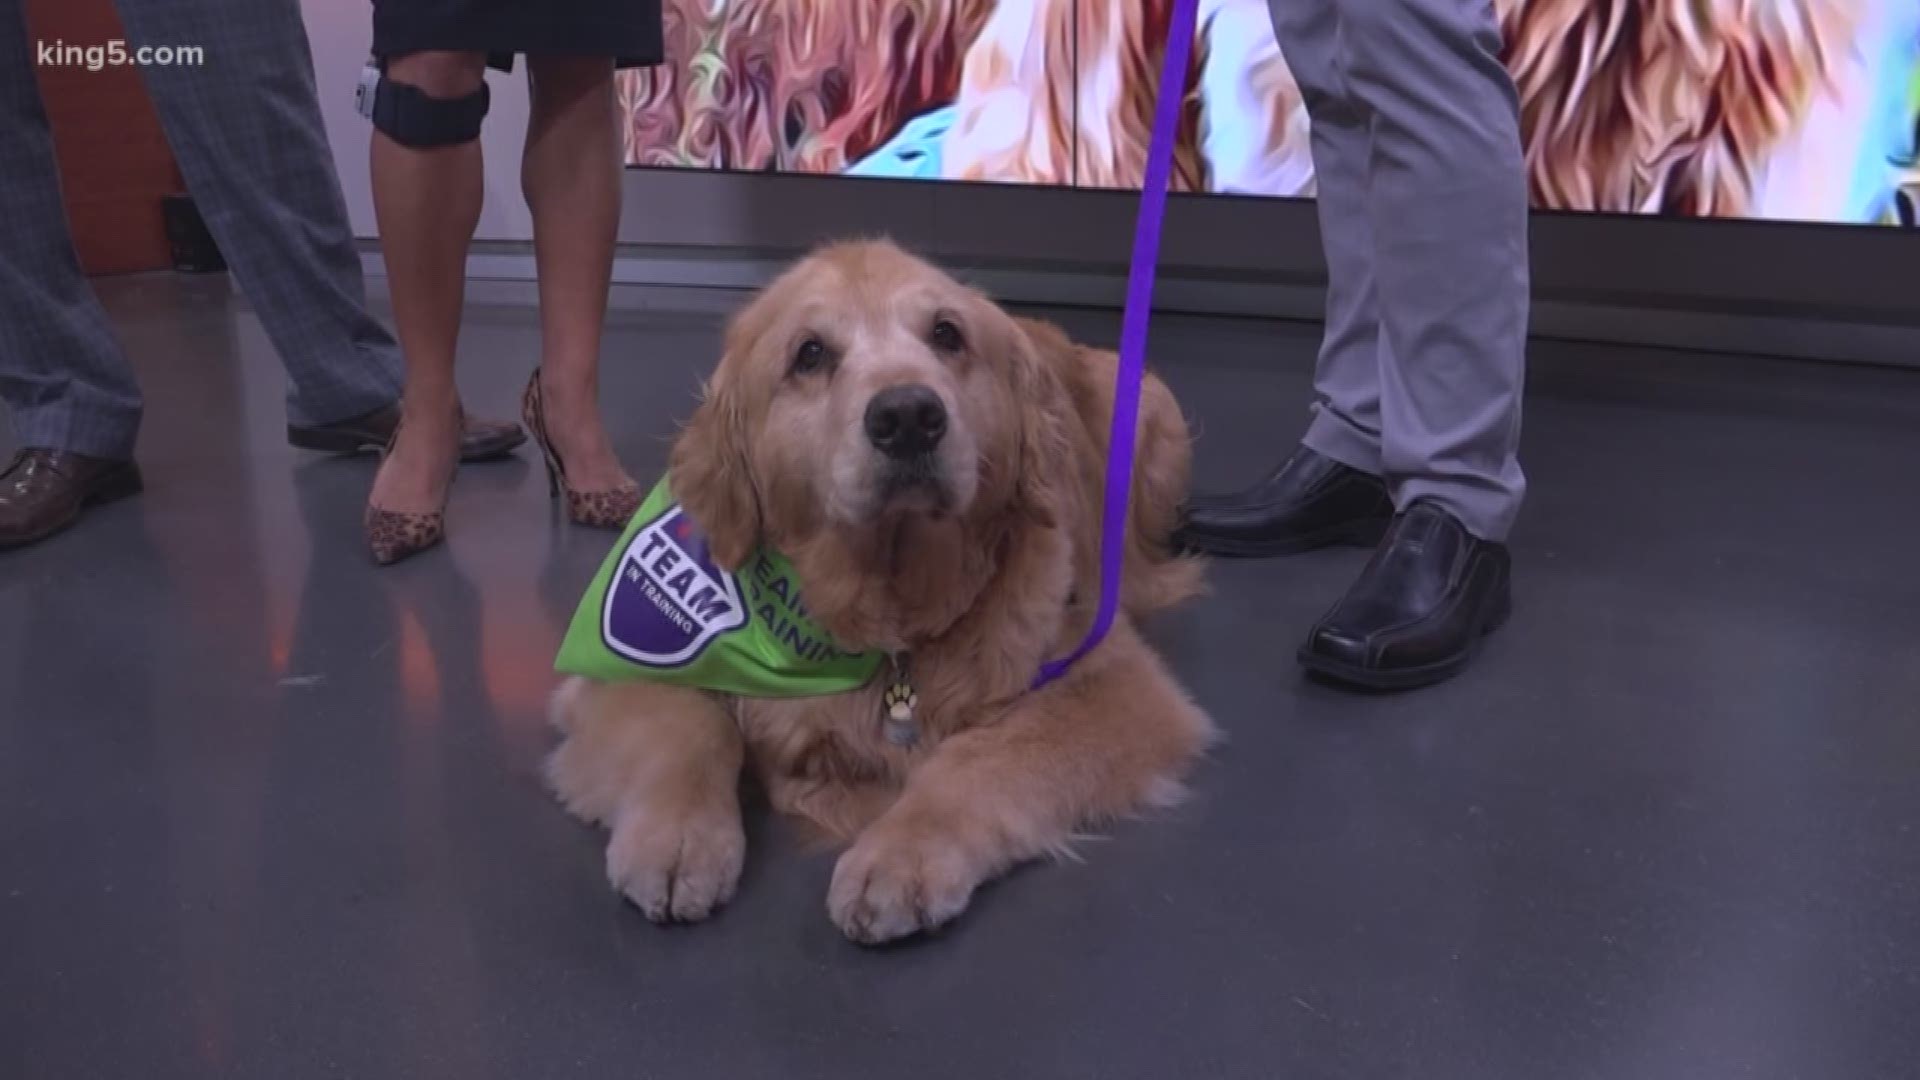 Seattle celebrity dog Dash and his human Ande are raising money to fight cancer through the Leukemia and Lymphoma Society. DonateWithDash.com